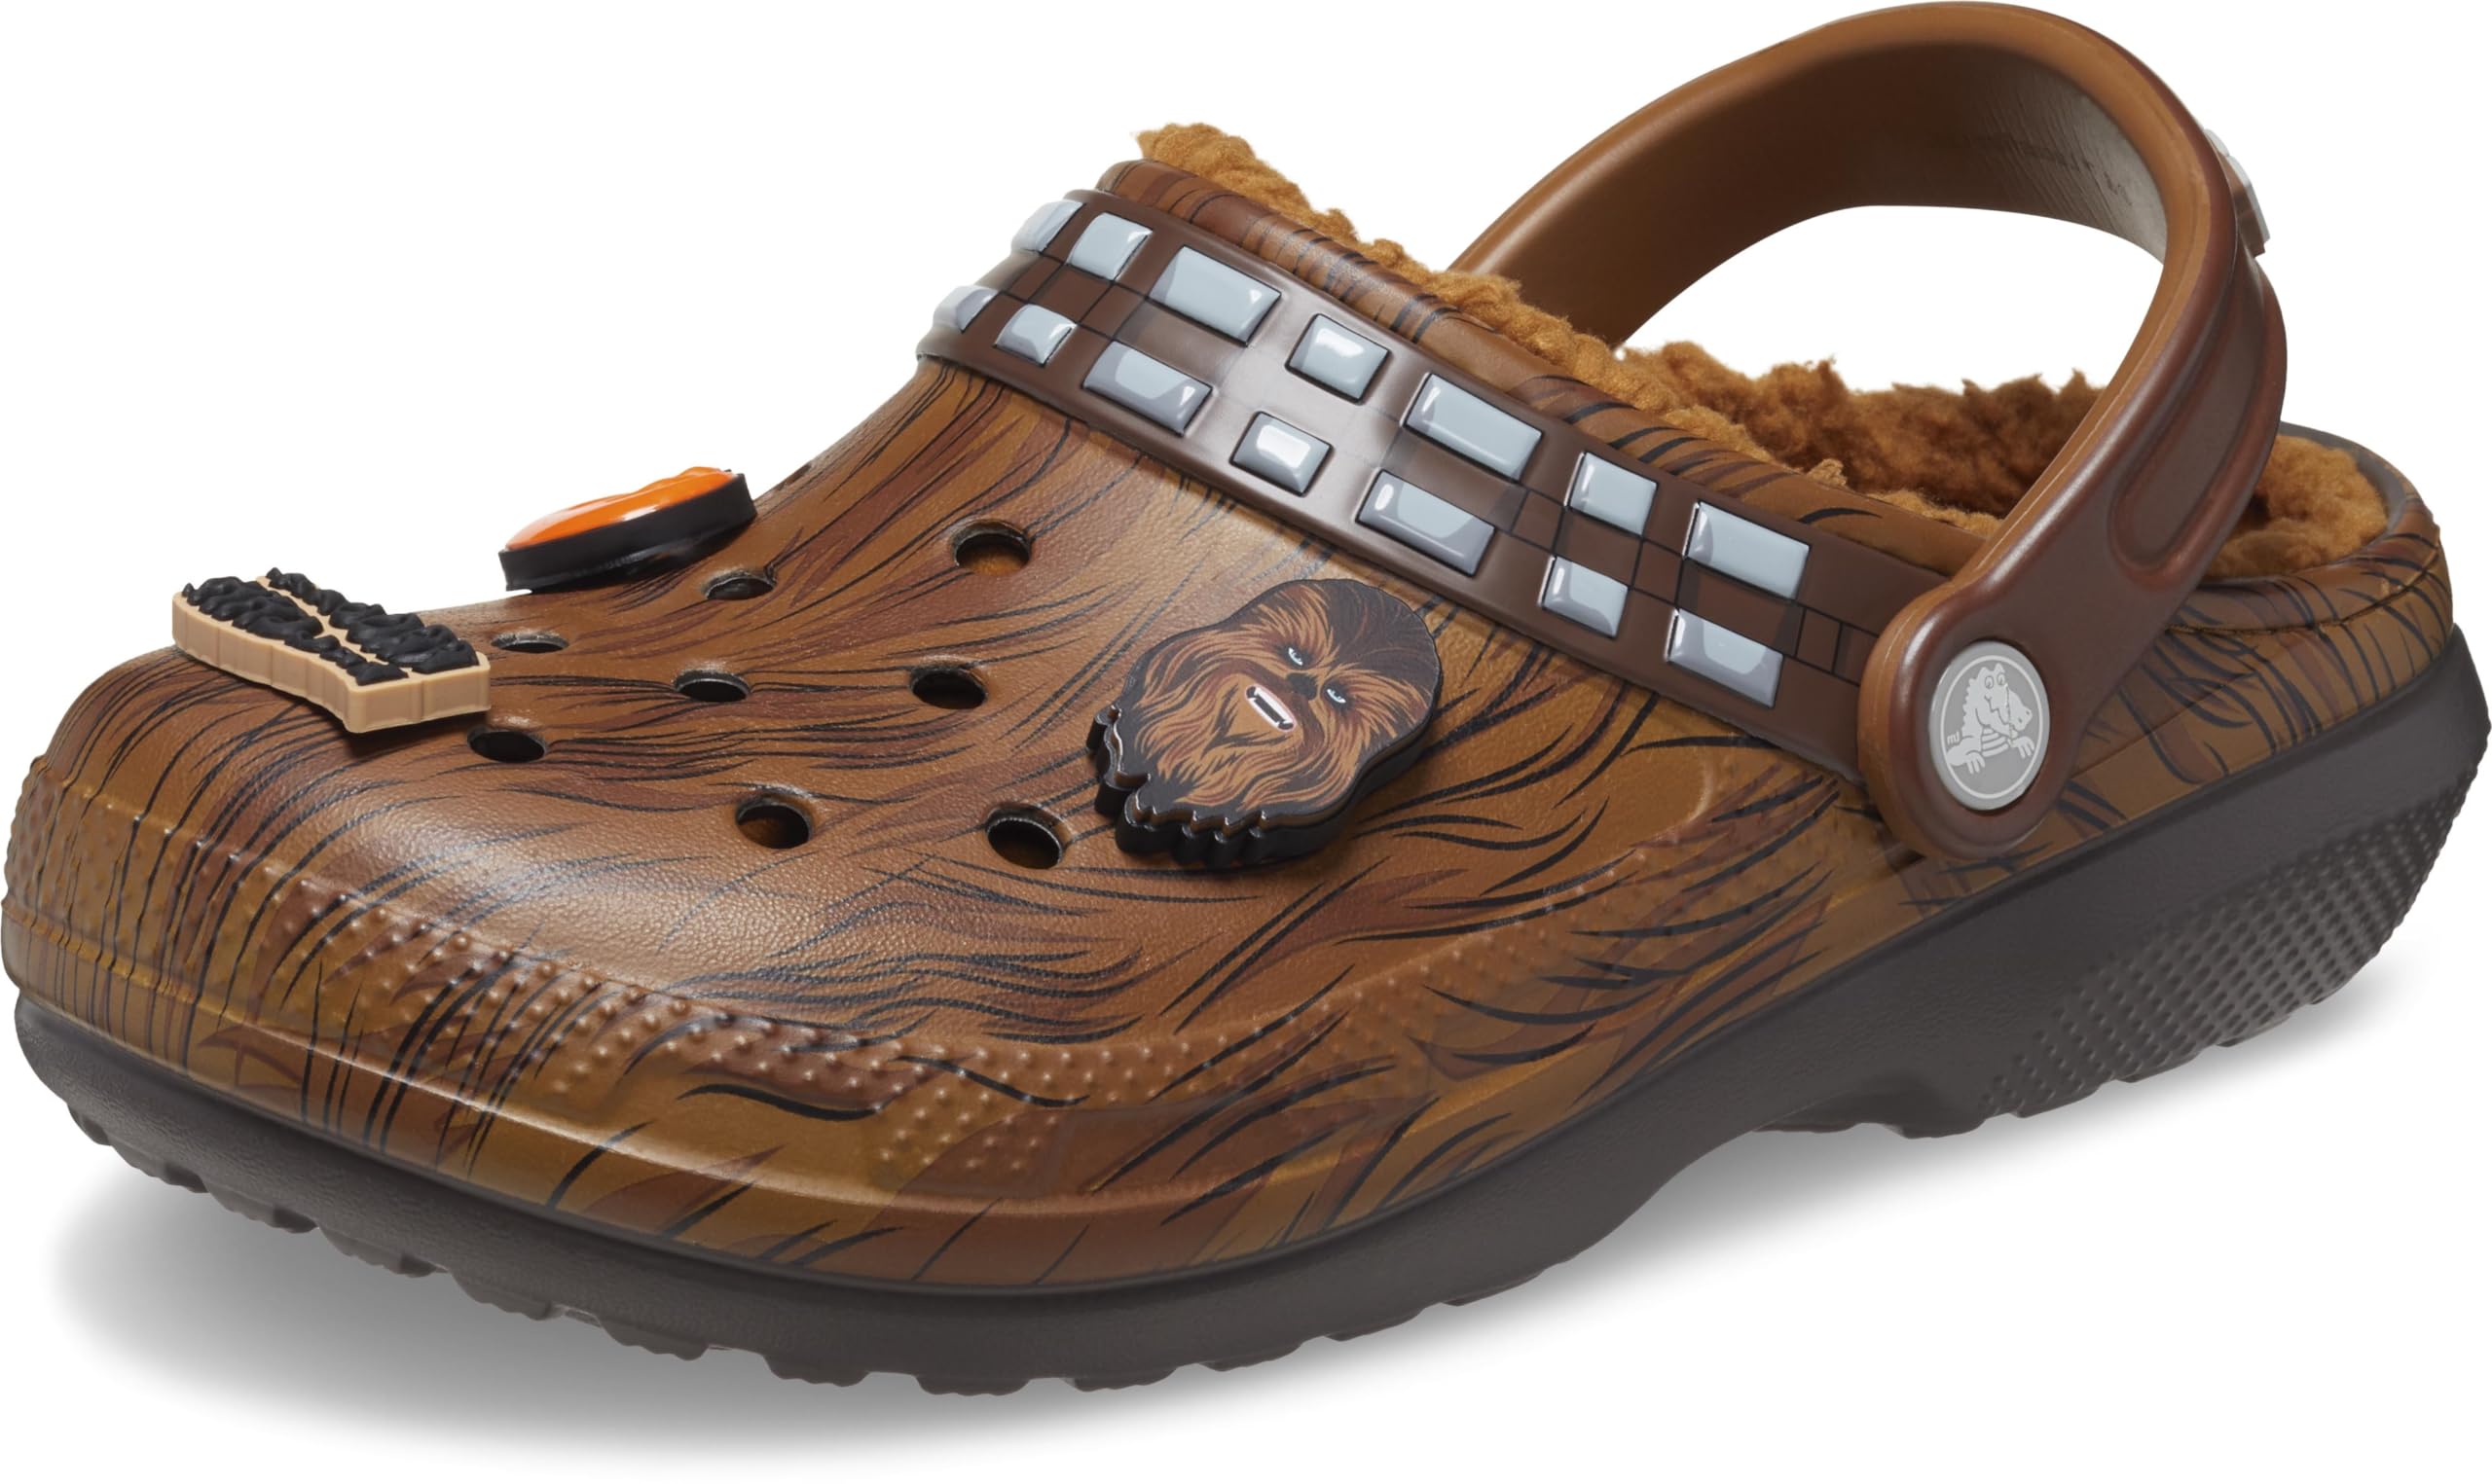 Crocs Unisex-Adult Star Wars Chewbacca Classic Lined Clogs, Fuzzy Slippers